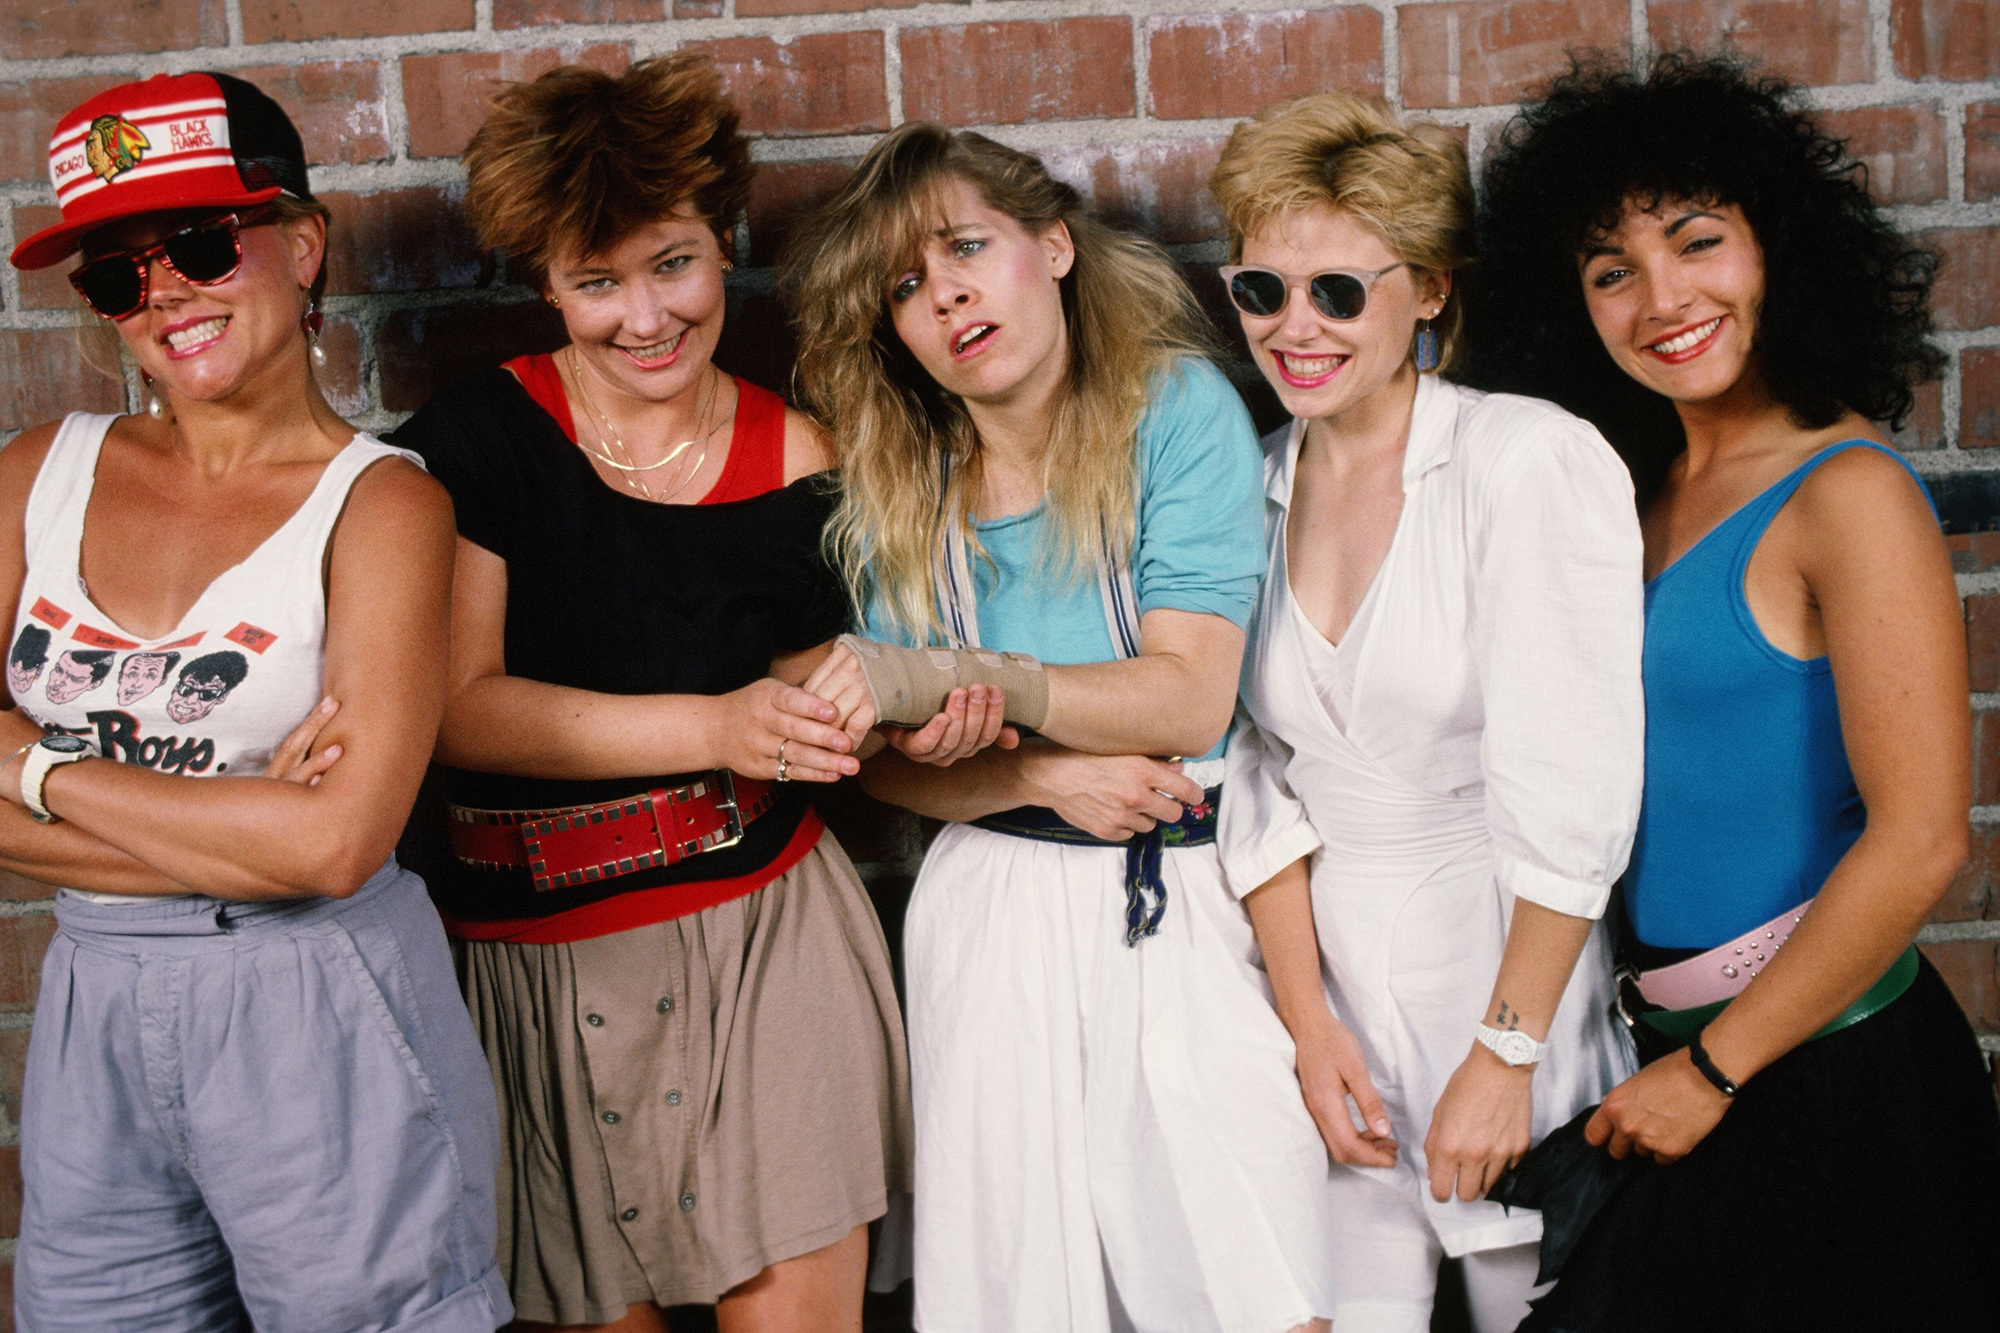 Go-Go's bassists, Colorful personalities, Early life experiences, Resilience and success, 2000x1340 HD Desktop